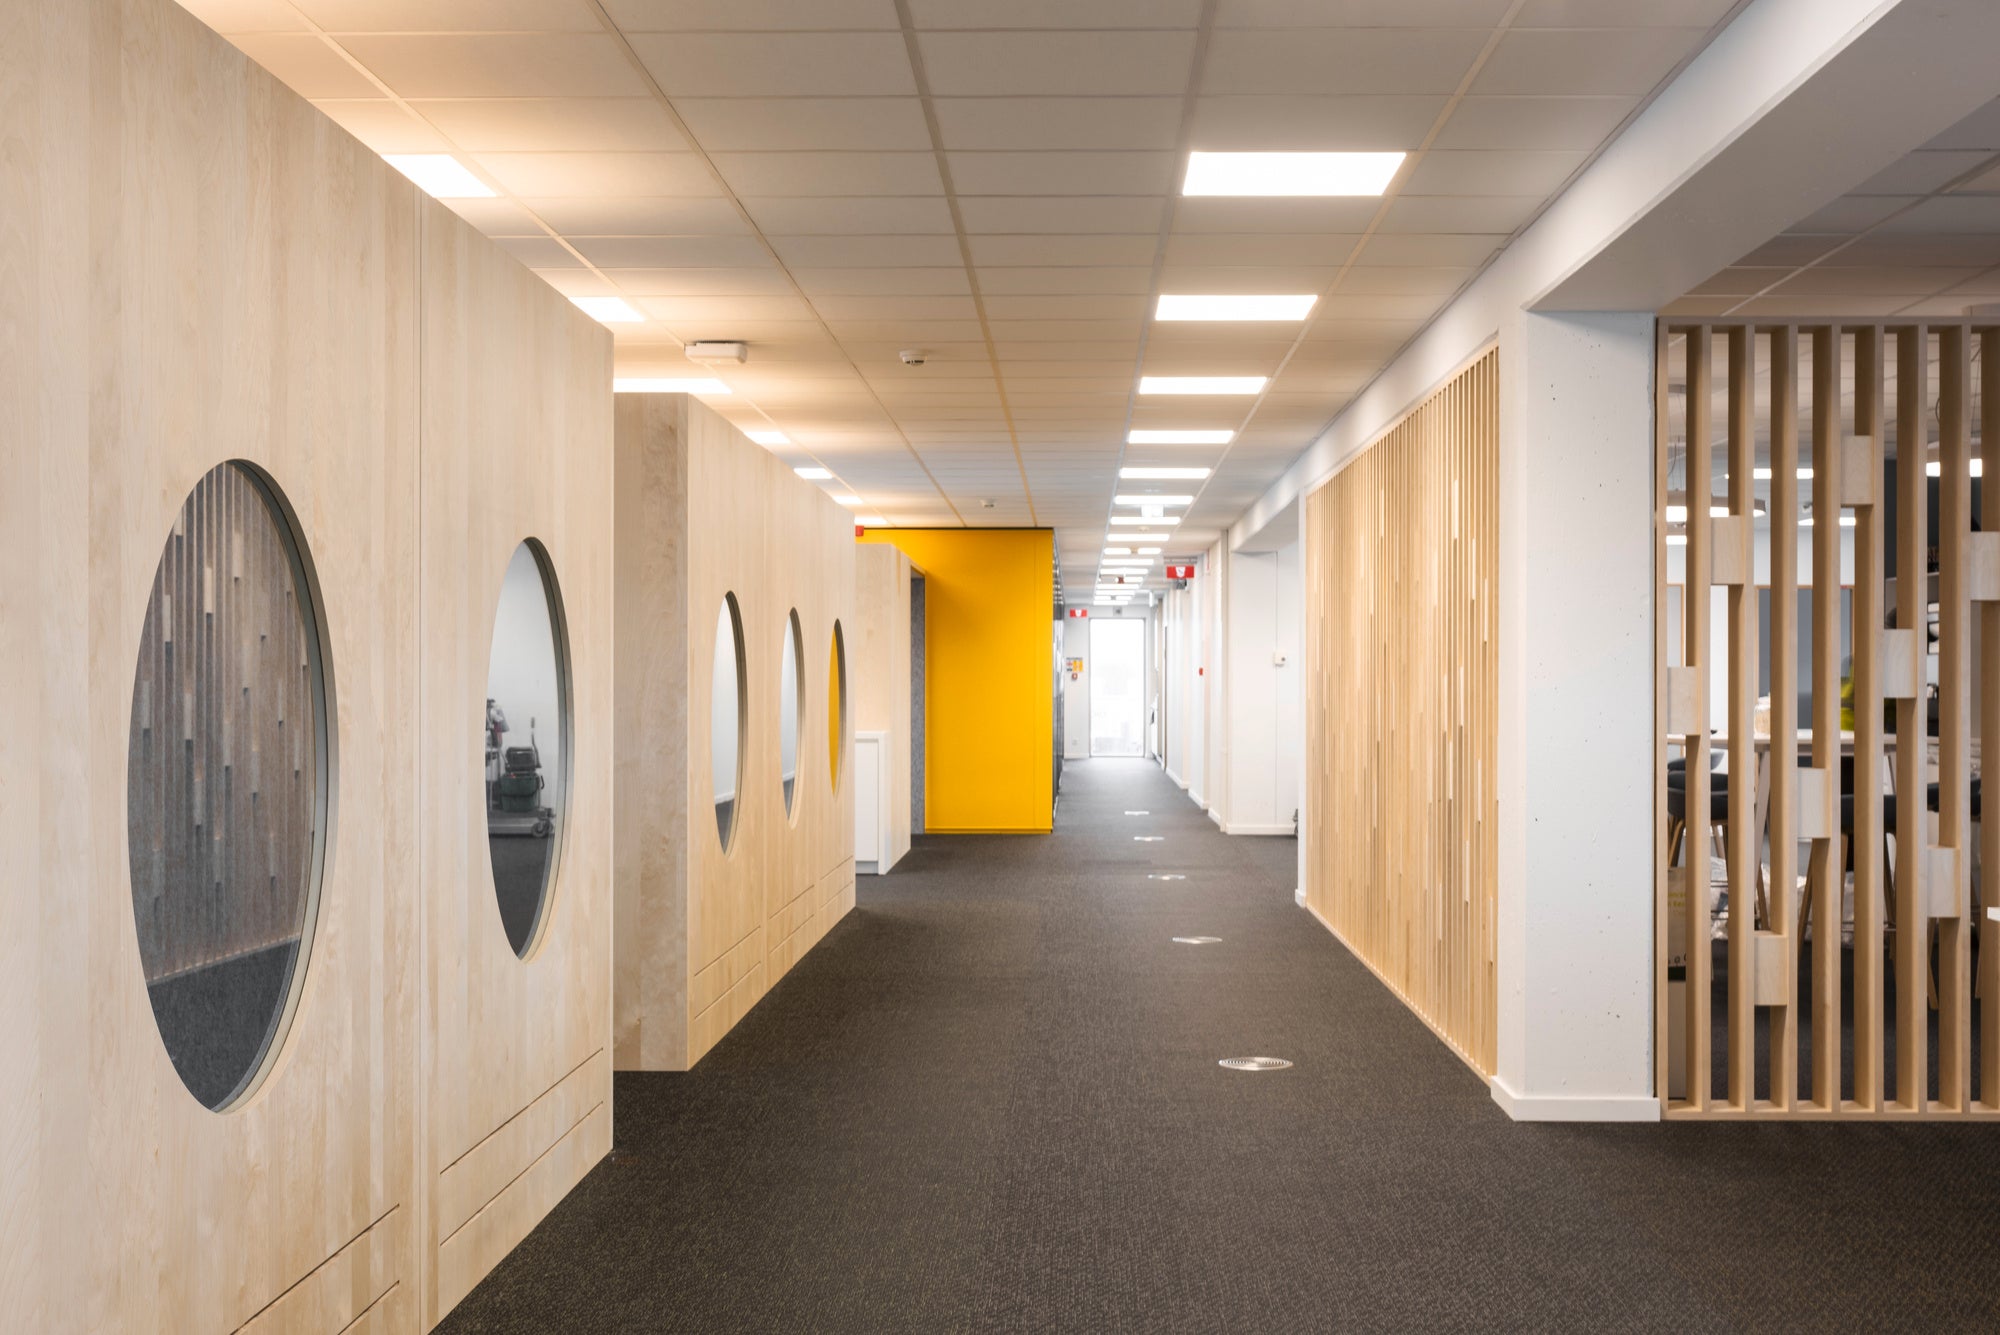 volvo trucks ghent - volvo trucks office - pods - office pods - bright wood wall - bright wood panels